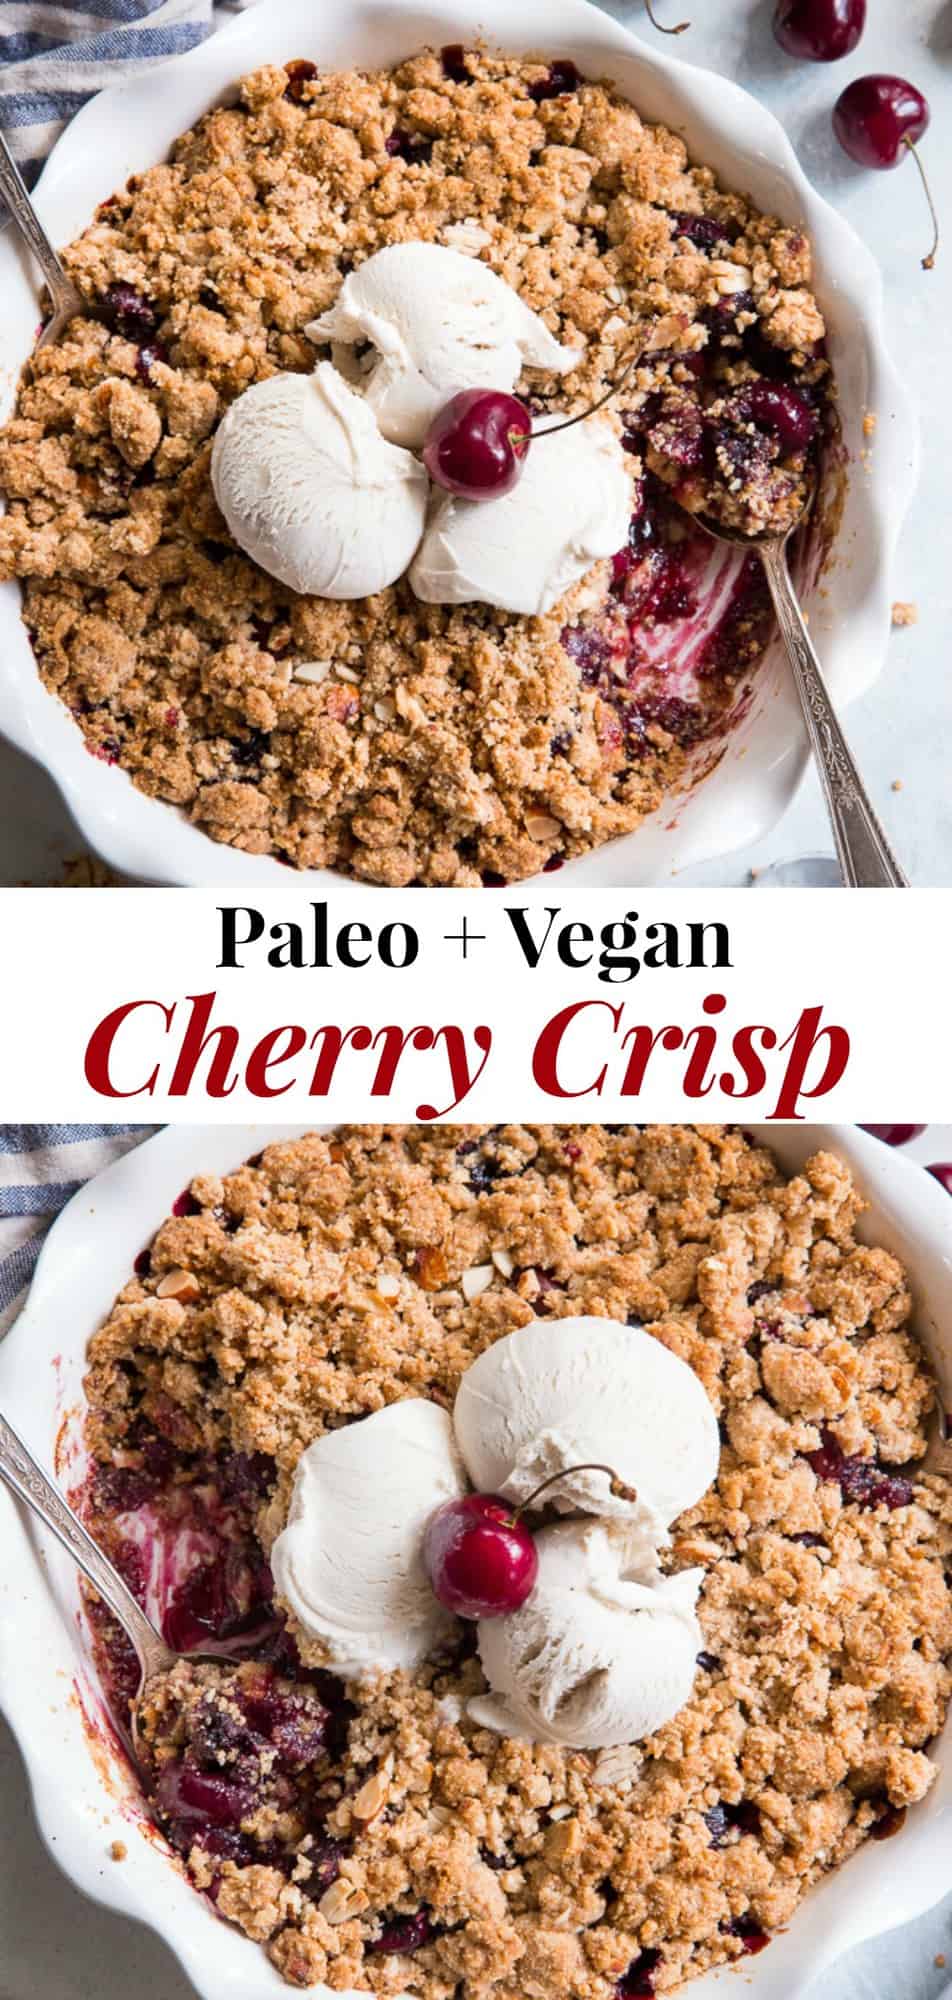 This classic cherry crisp is irresistibly delicious and easy to make!  A sweet gooey cherry filling is topped with a toasty crumble for a summer dessert that will make everyone come back for seconds.  It's paleo, vegan, gluten-free, dairy-free and refined sugar free. #paleo #vegan #glutenfree 